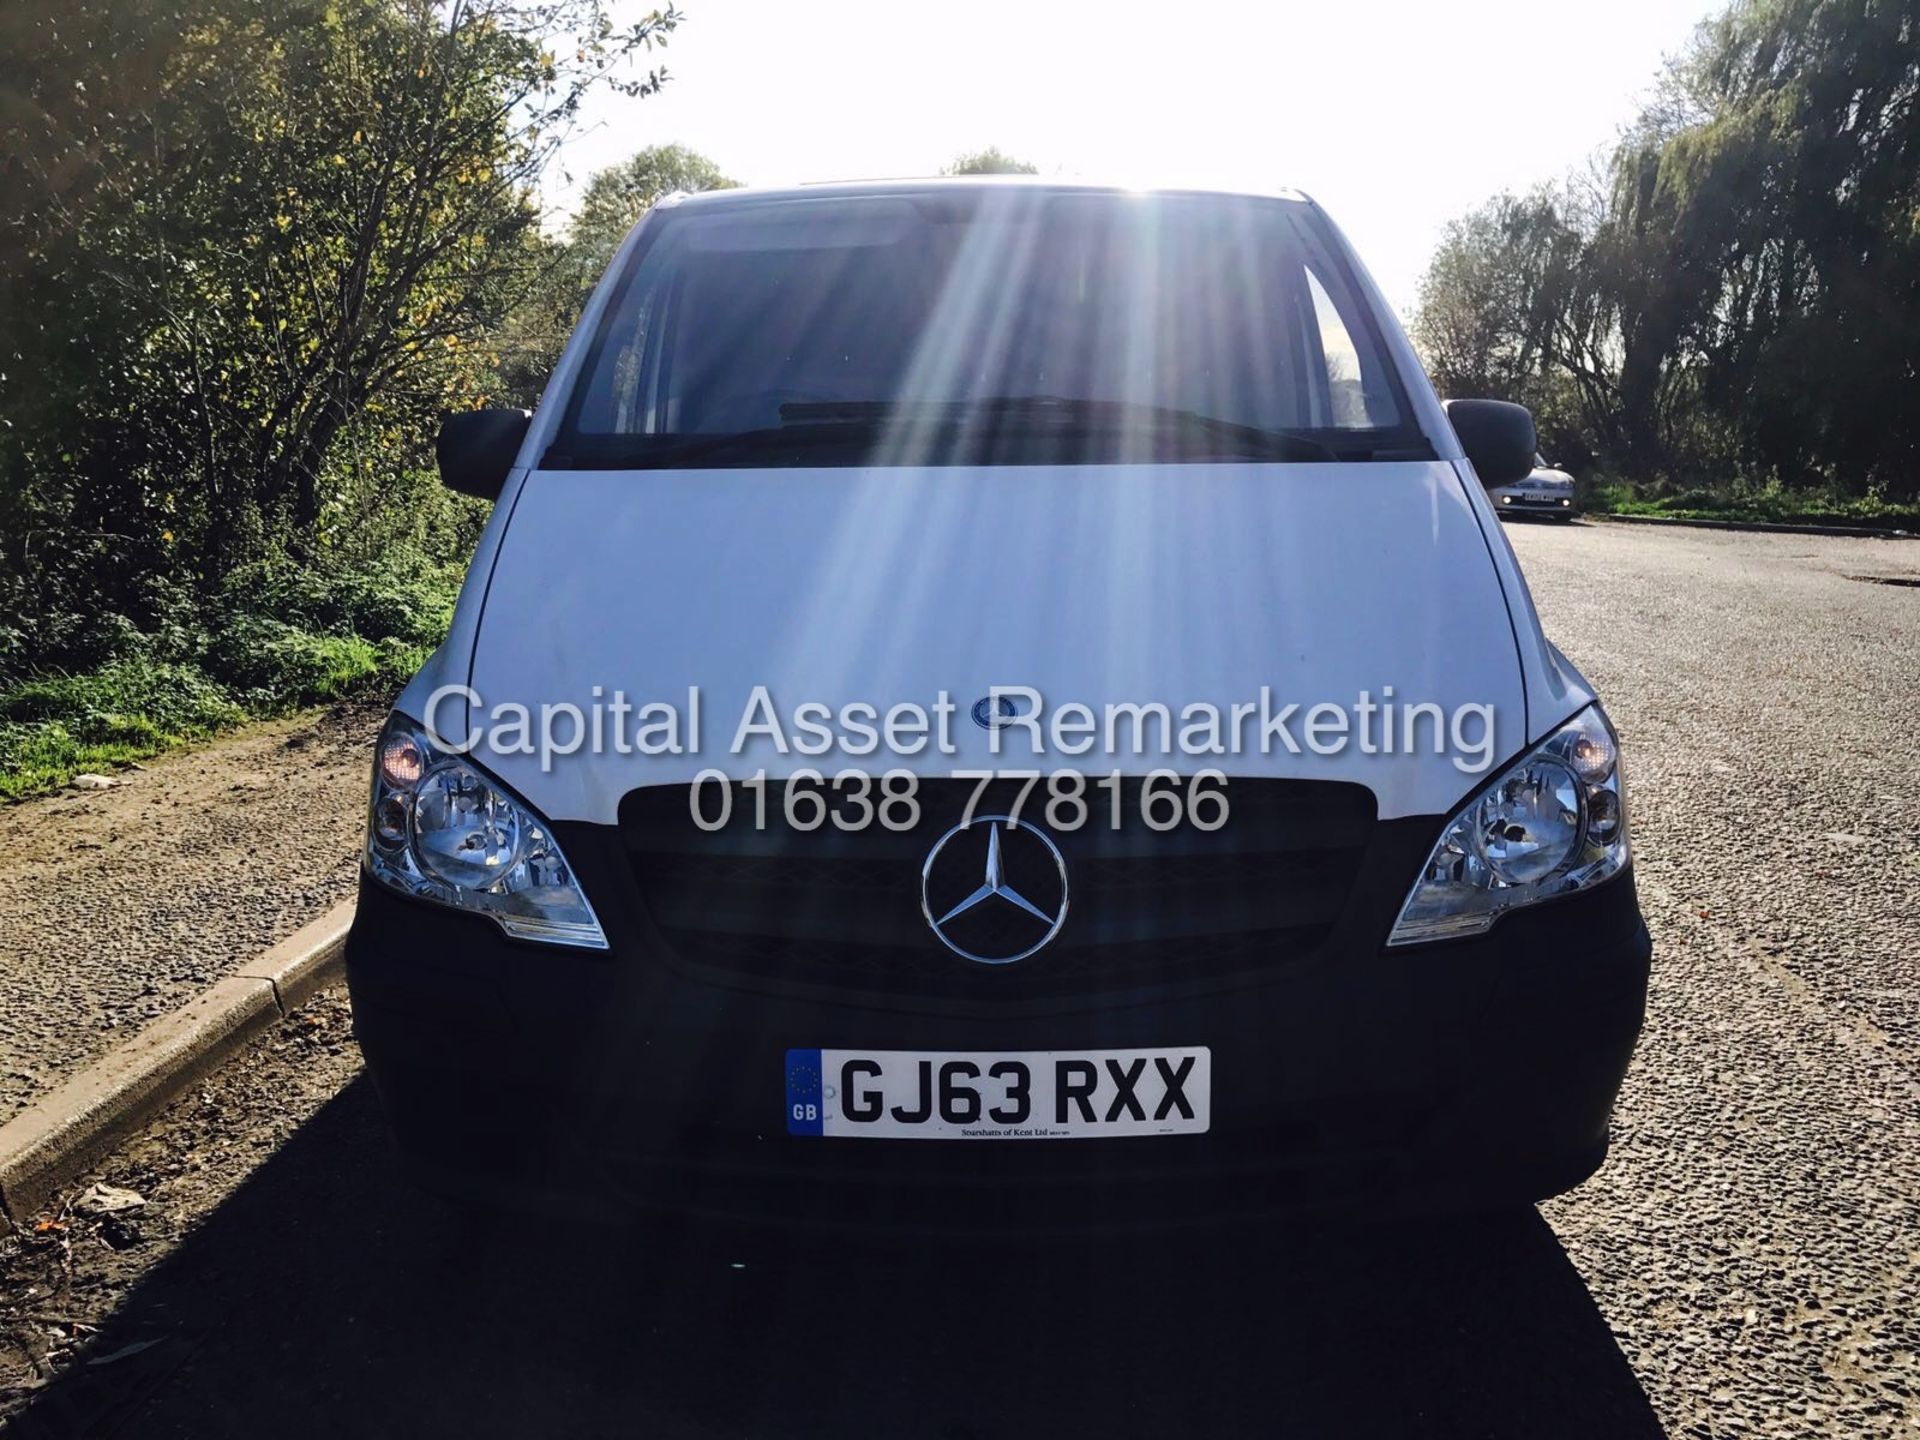 MERCEDES VITO 113CDI "136BHP - 6 SPEED" LWB (2014 MODEL - NEW SHAPE) ONLY 62K - AIR CON - ELEC PACK - Image 2 of 13